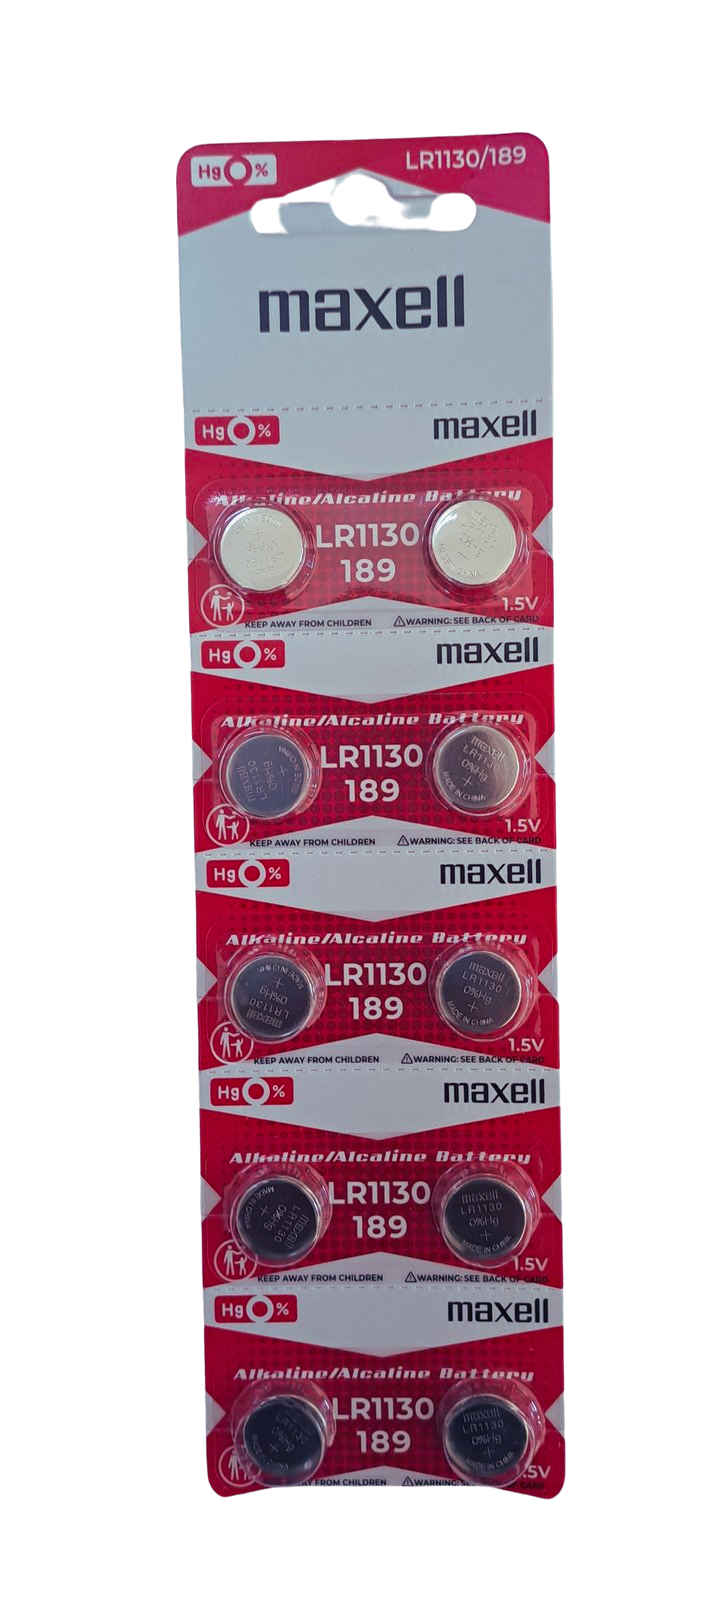  LR1130 (189) Alkaline Button Cell Battery by maxell